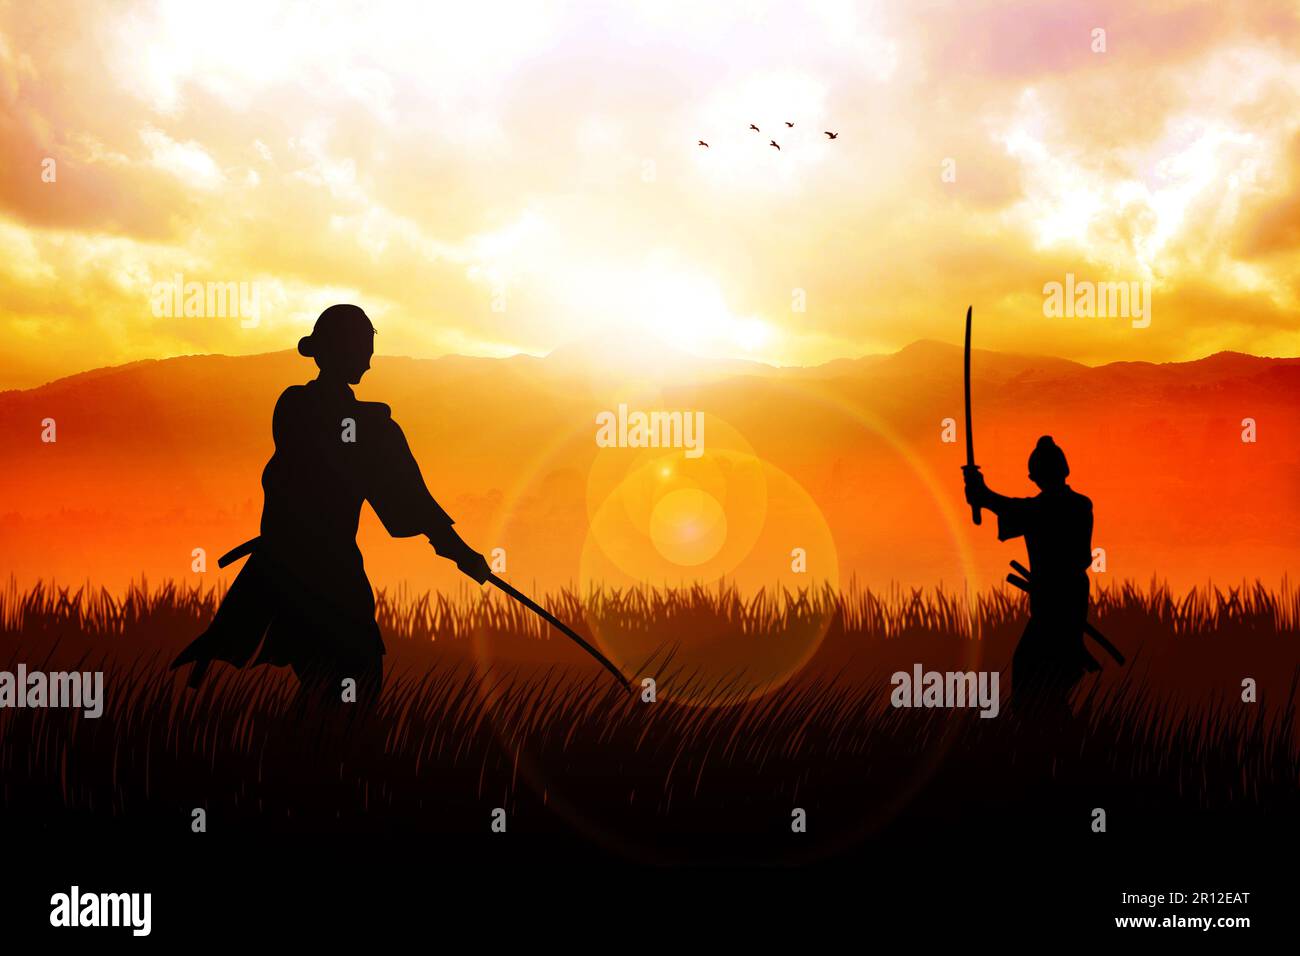 Two Samurai in duel stance facing each other on dramatic landscape Stock Photo